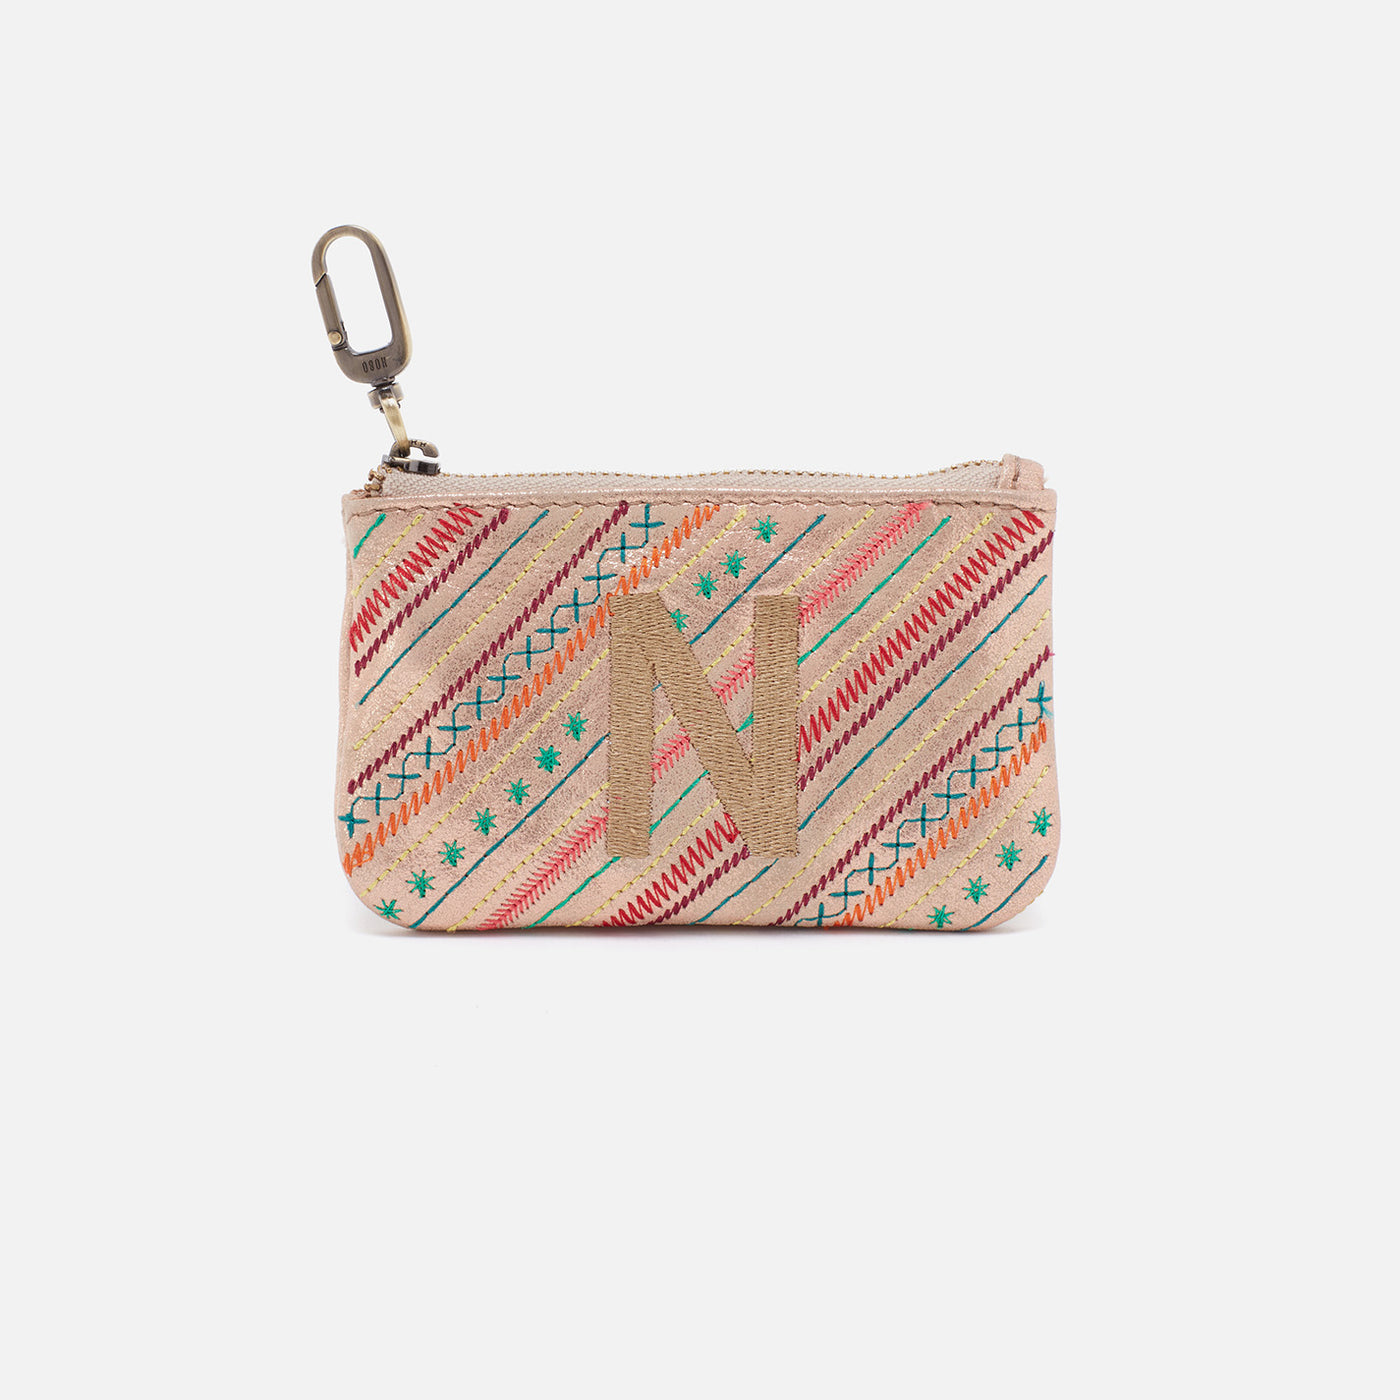 Monogram Pouch in Metallic Soft Leather - N